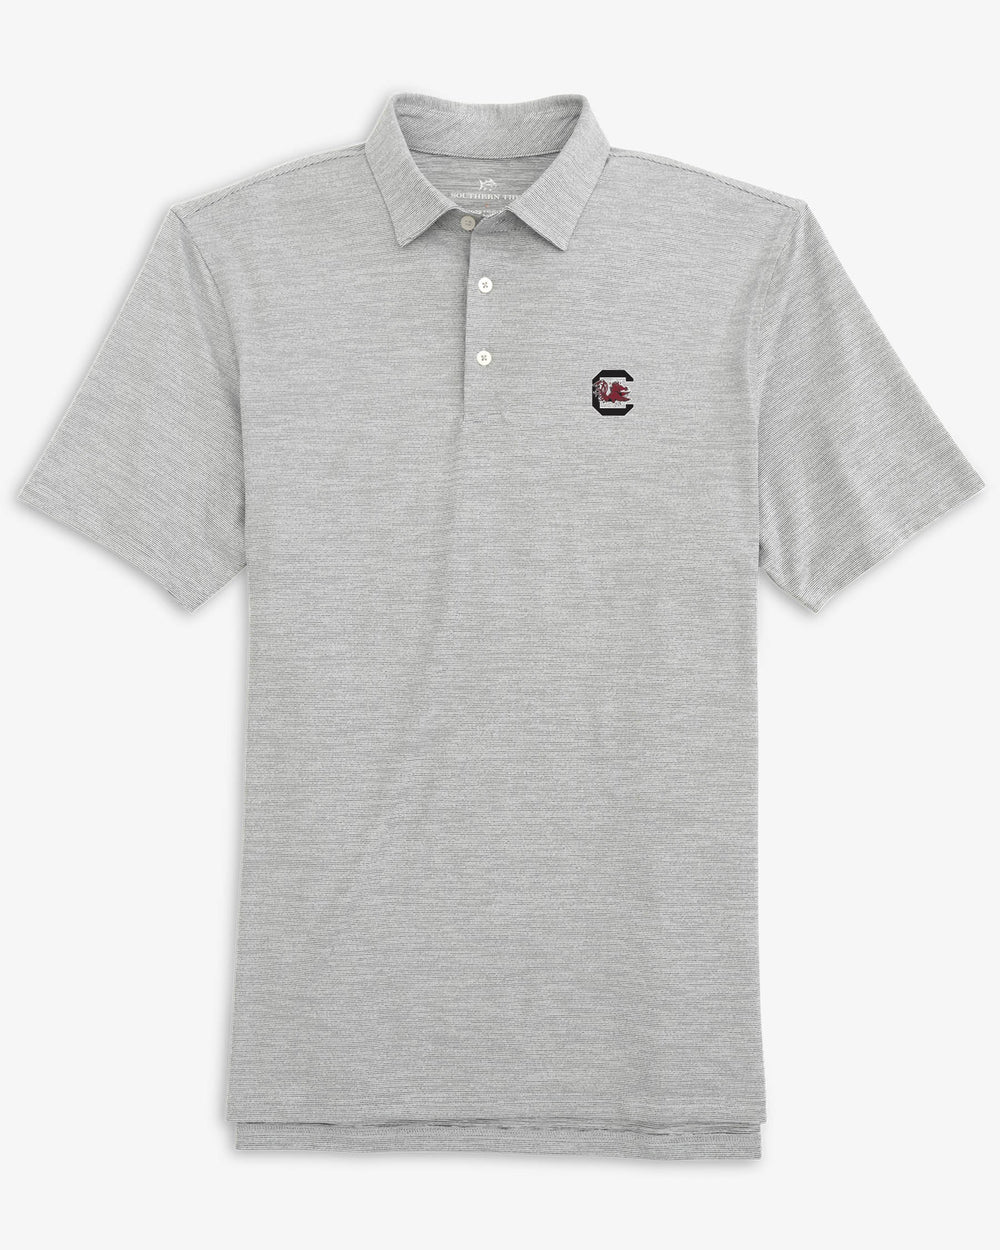 The front view of the South Carolina Driver Spacedye Polo Shirt by Southern Tide - Black